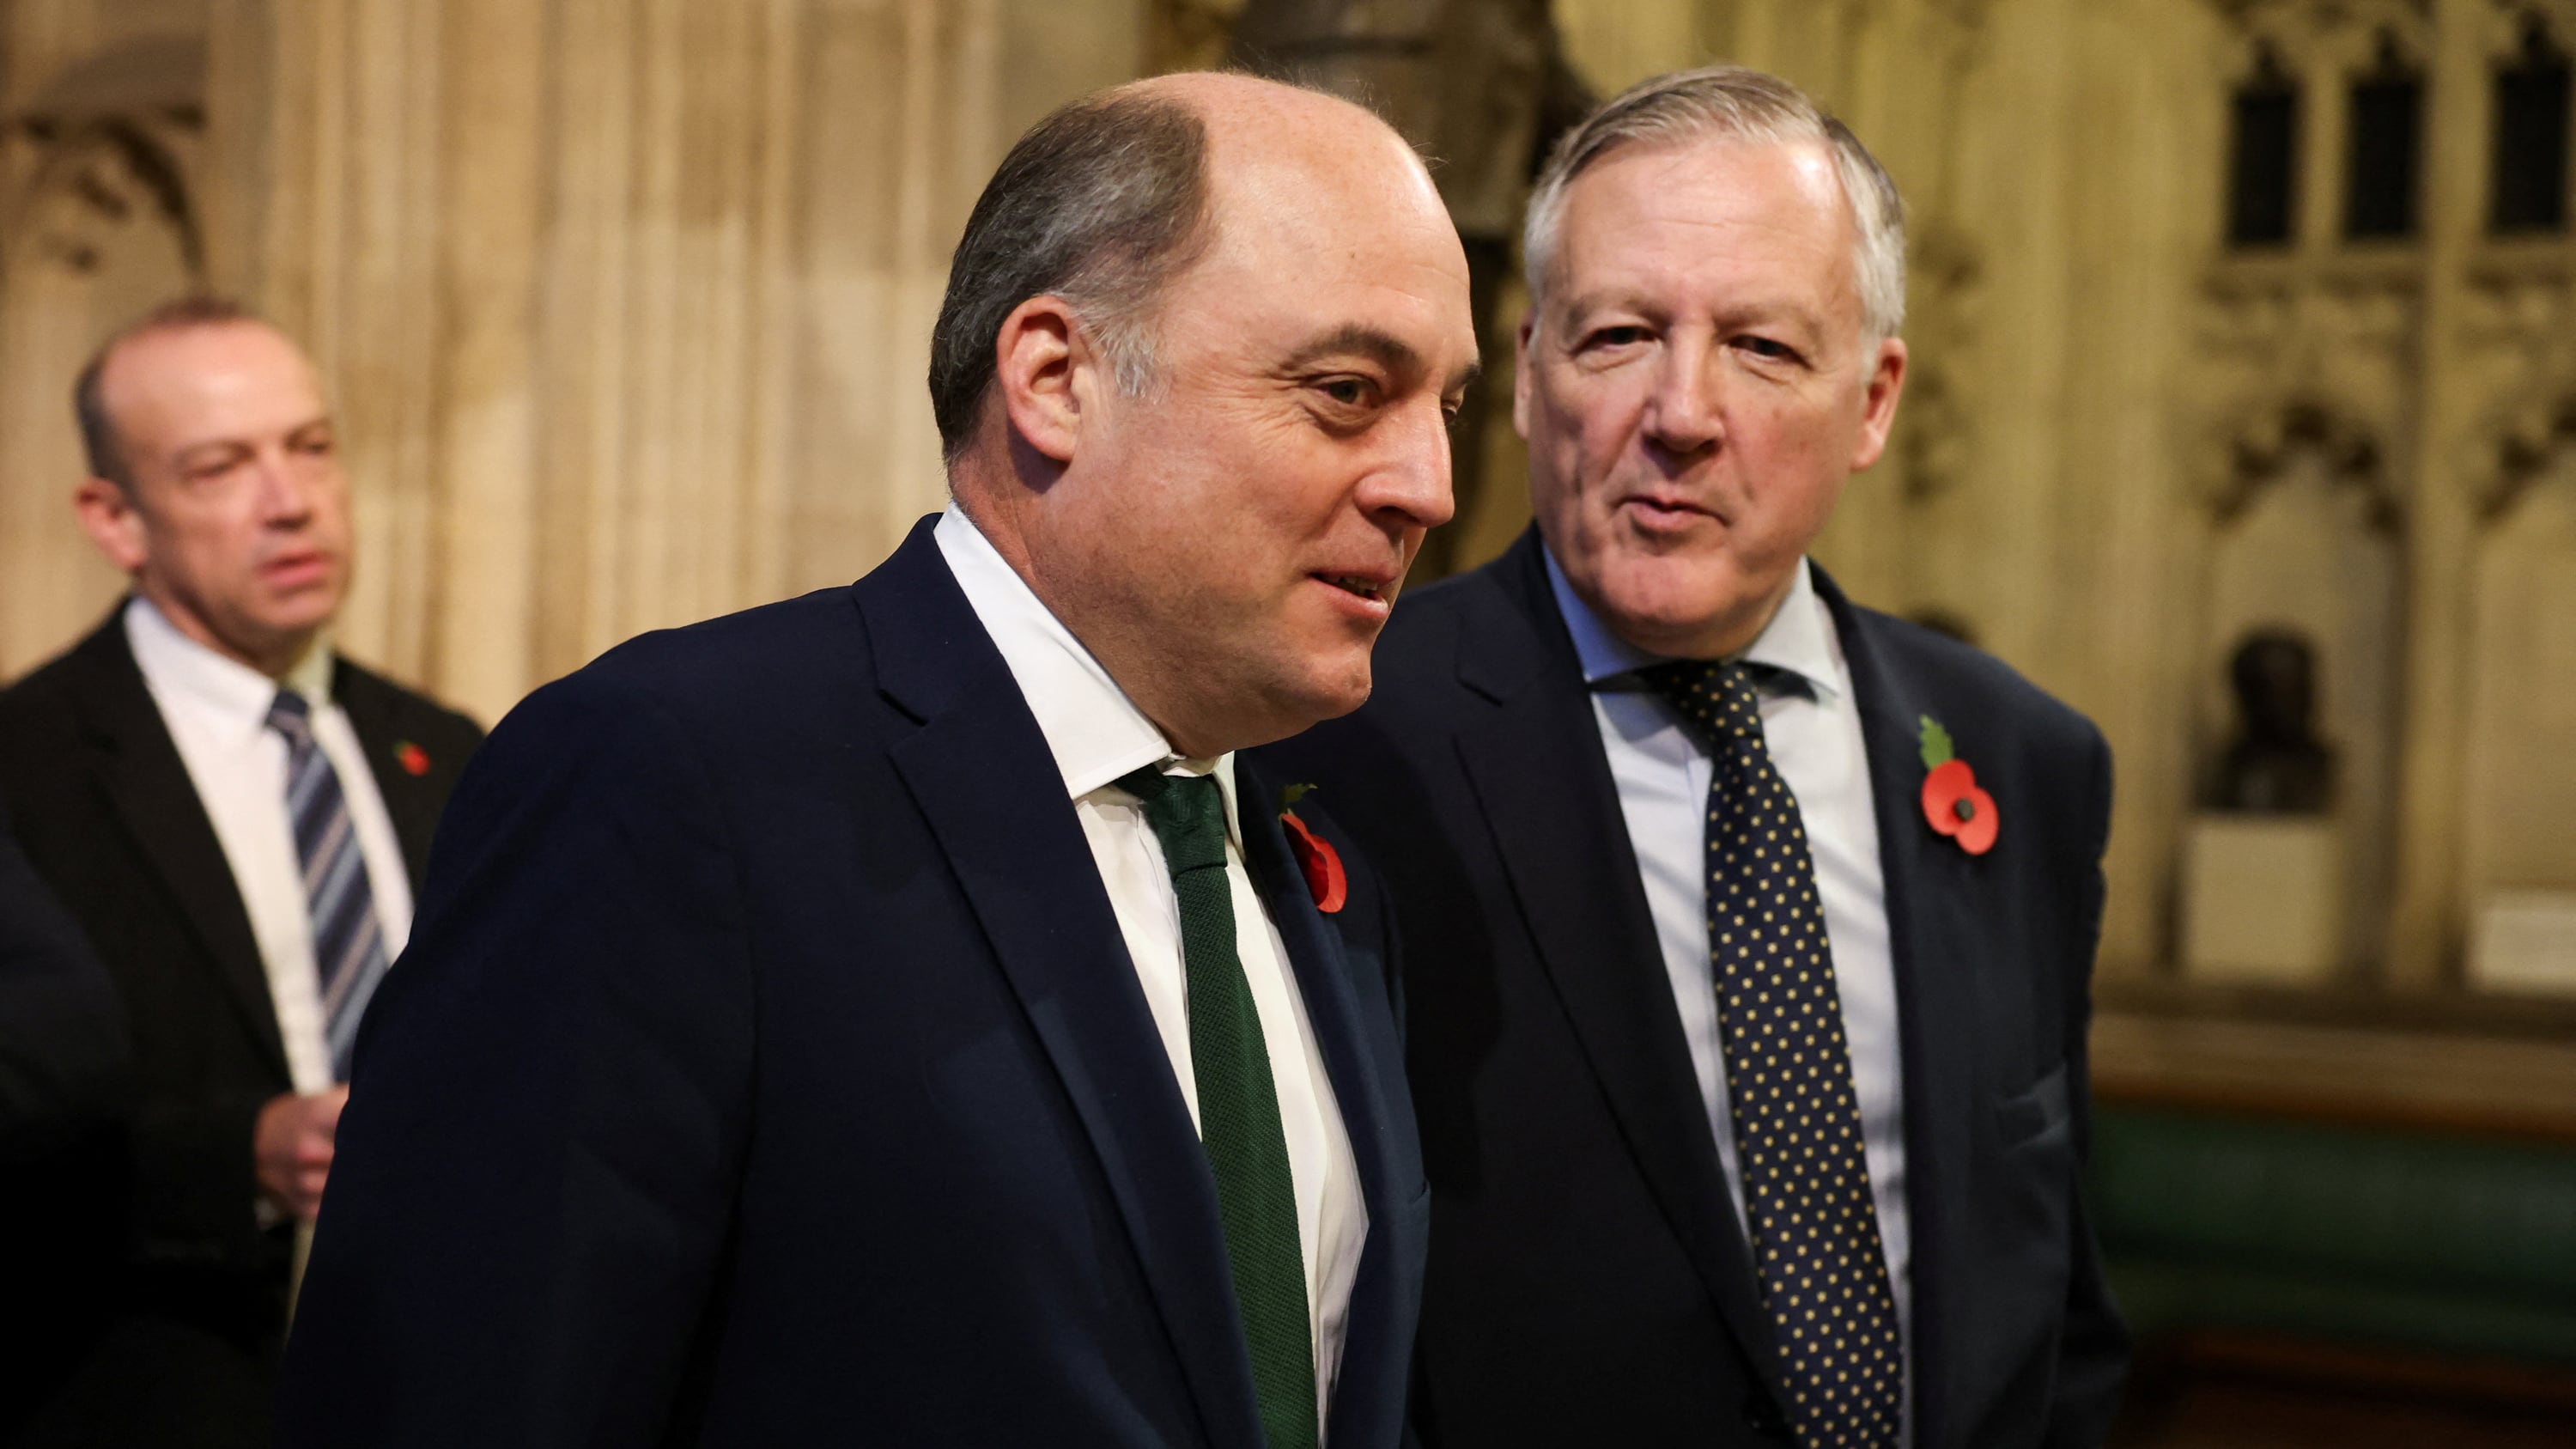 Ben Wallace (centre) walks through the Members’ Lobby at the Palace of Westminster following the State Opening of Parliament in the House of Lords, London